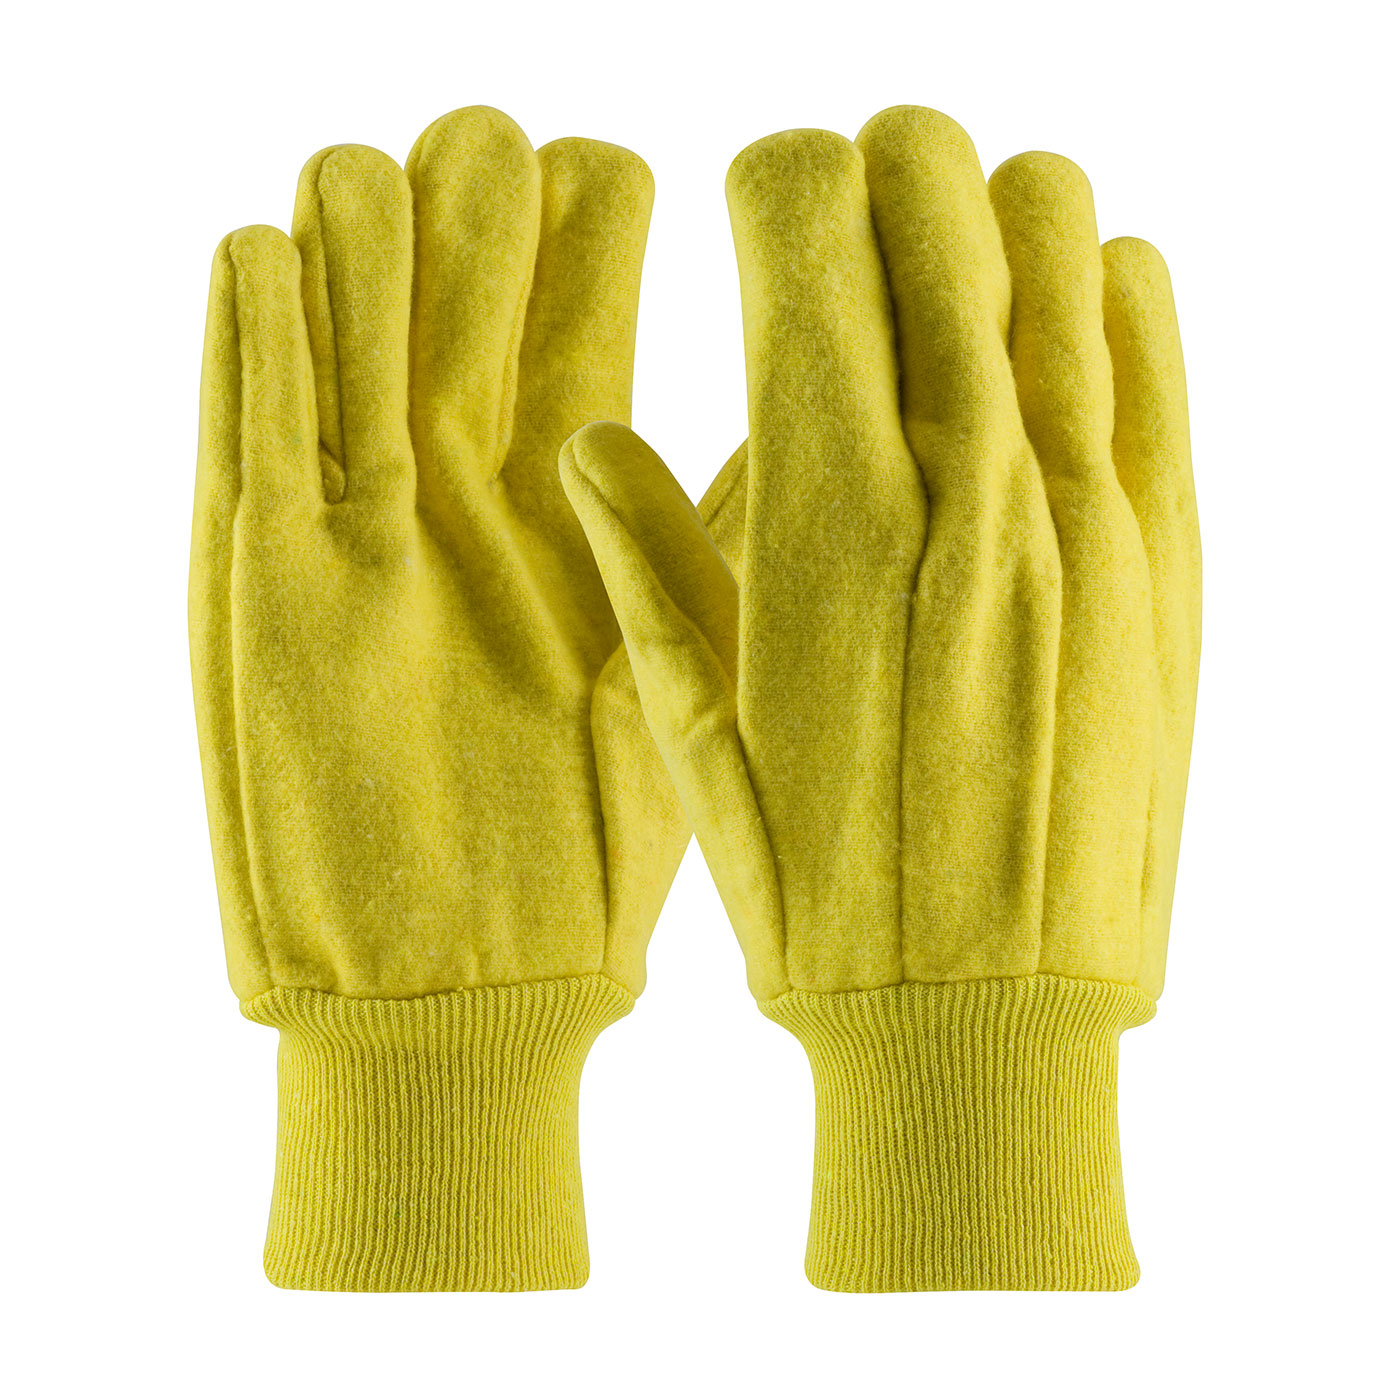 PIP Gold Regular Grade Double Layer Nap-out Finish Cotton Chore Gloves - Knit Wrist